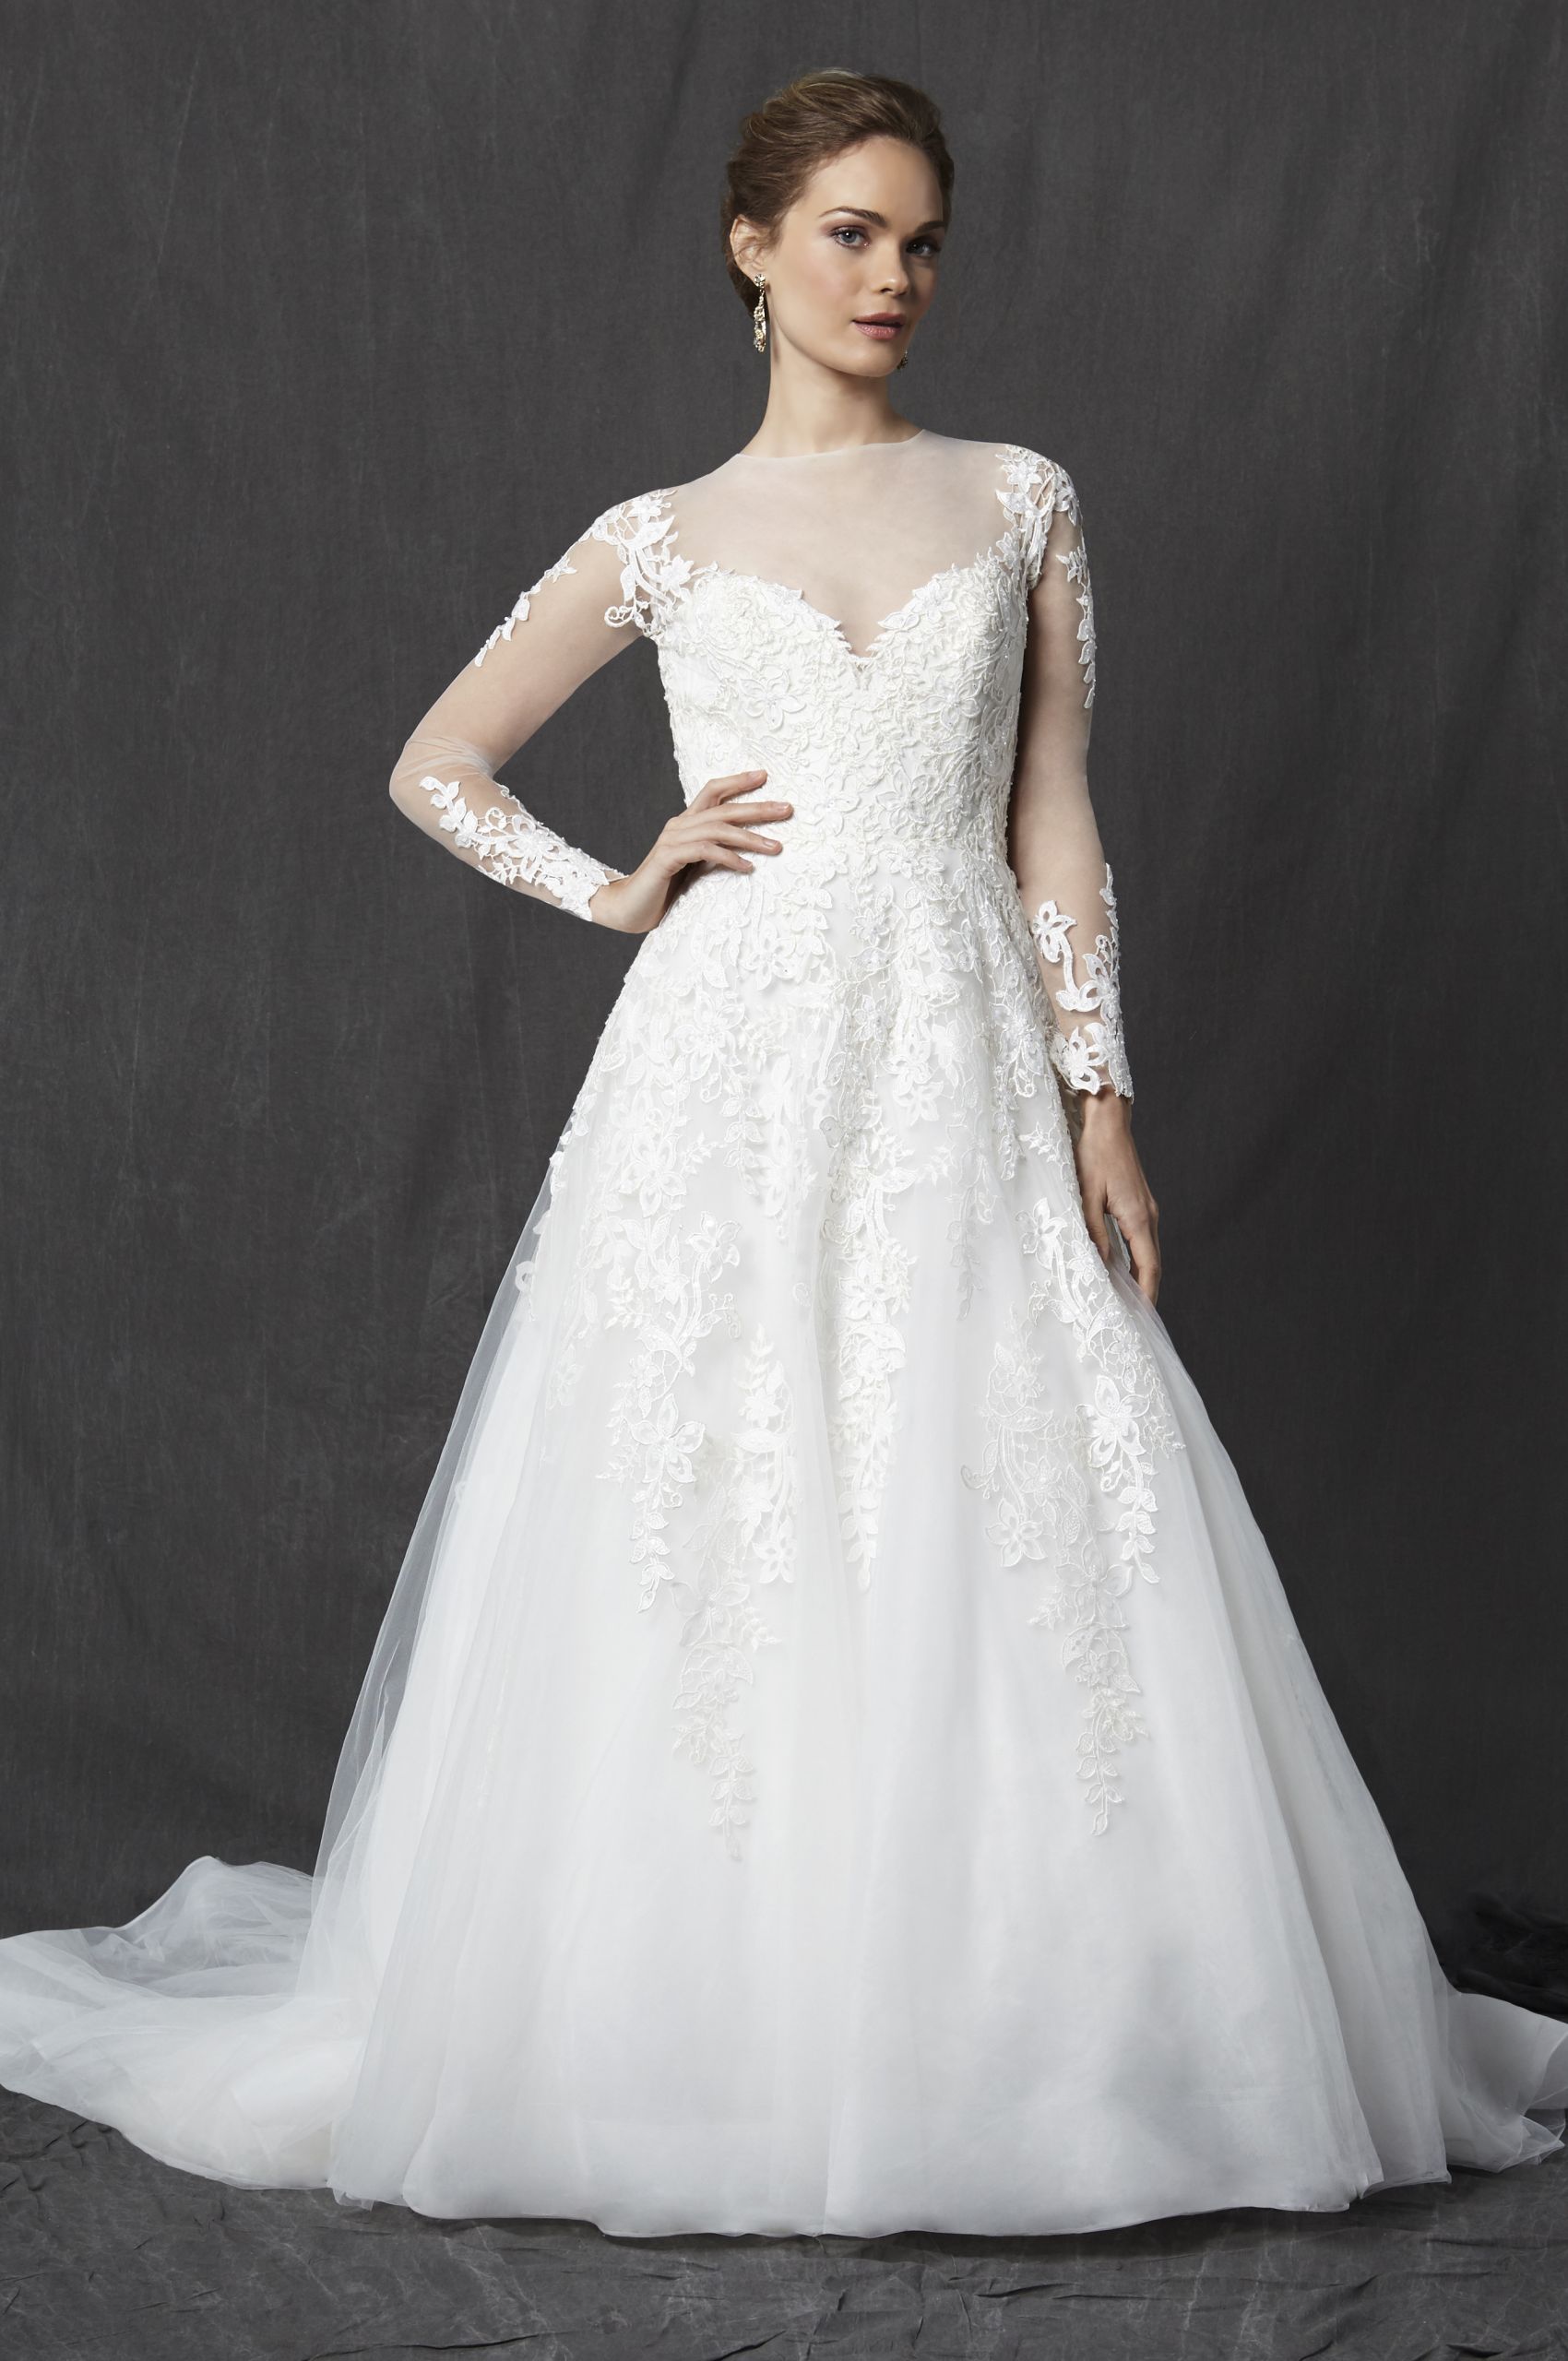 Lace Sweetheart Wedding Dress
 Illusion Sweetheart Neckline Long Sleeve Lace A line